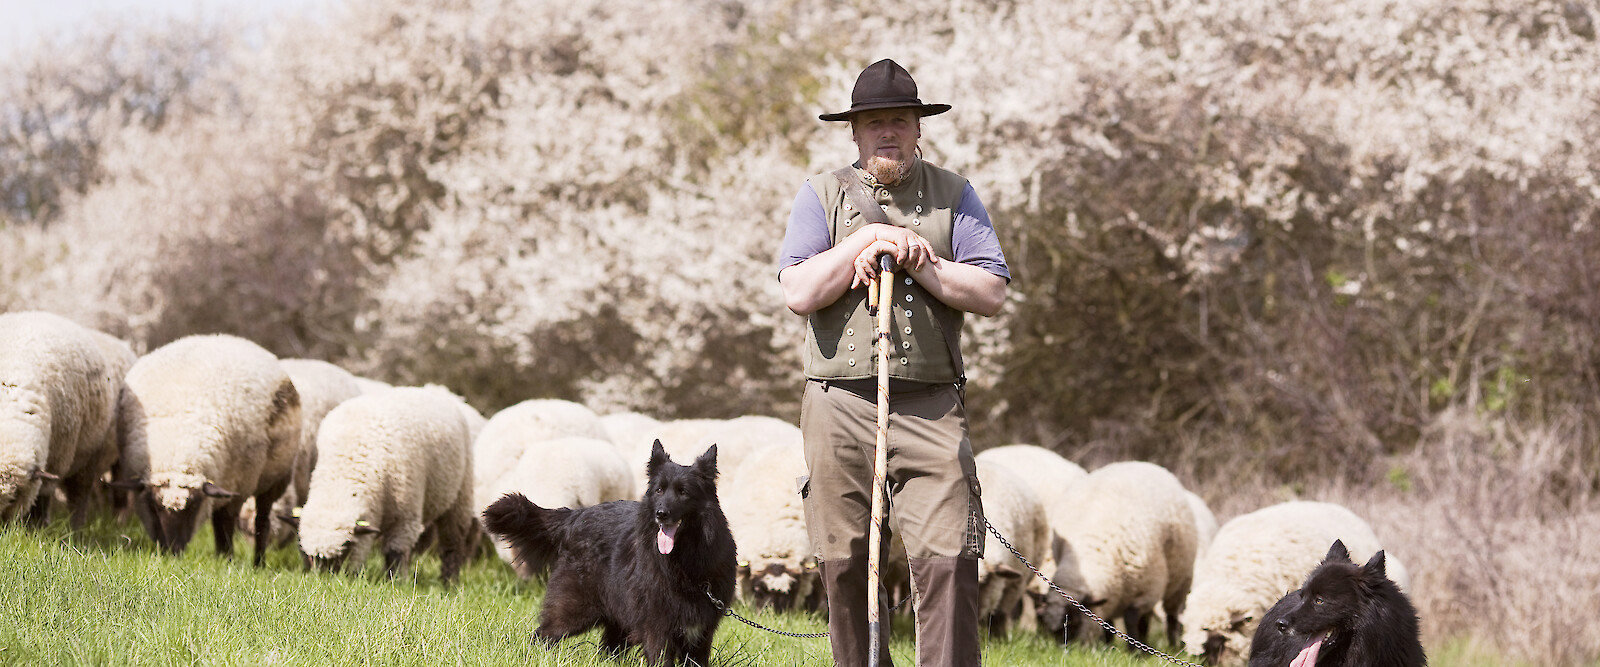 Shepherd with dogs in front of flock on pasture.